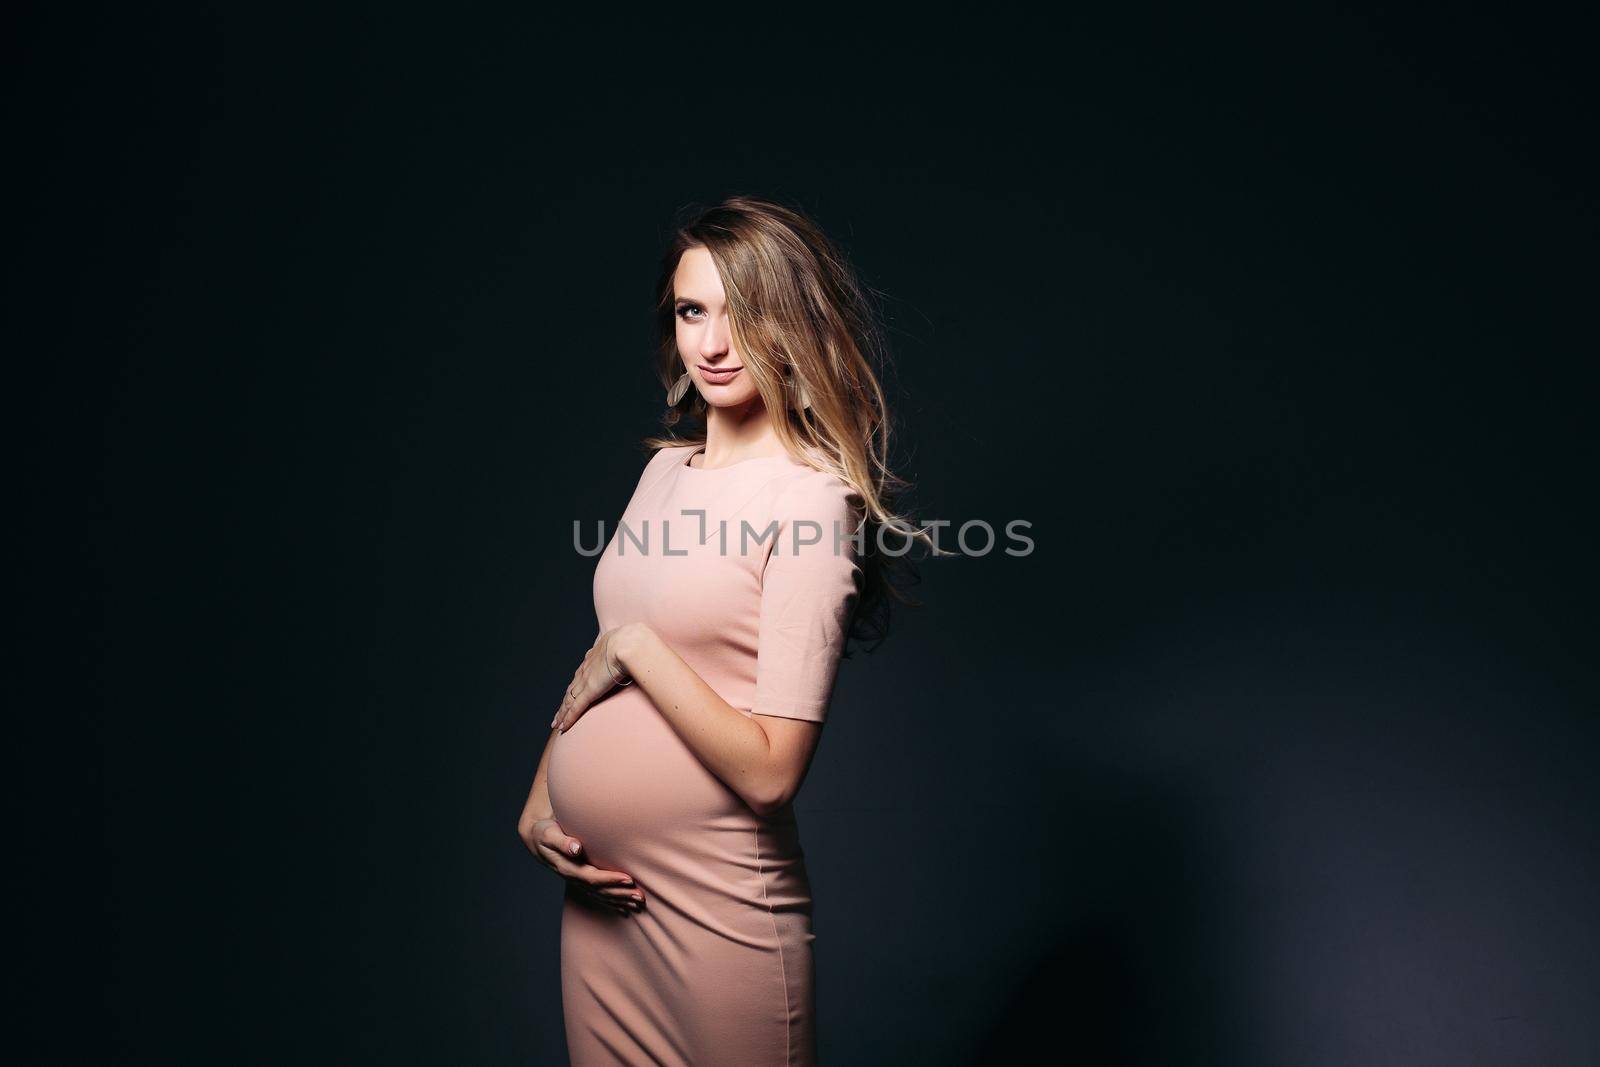 Windy effect on studio portrait of beautiful pregnant woman in pink dress, embracing belly. Elegant and stylish female posing, looking at side. Concept of pragnancy fashion and look.